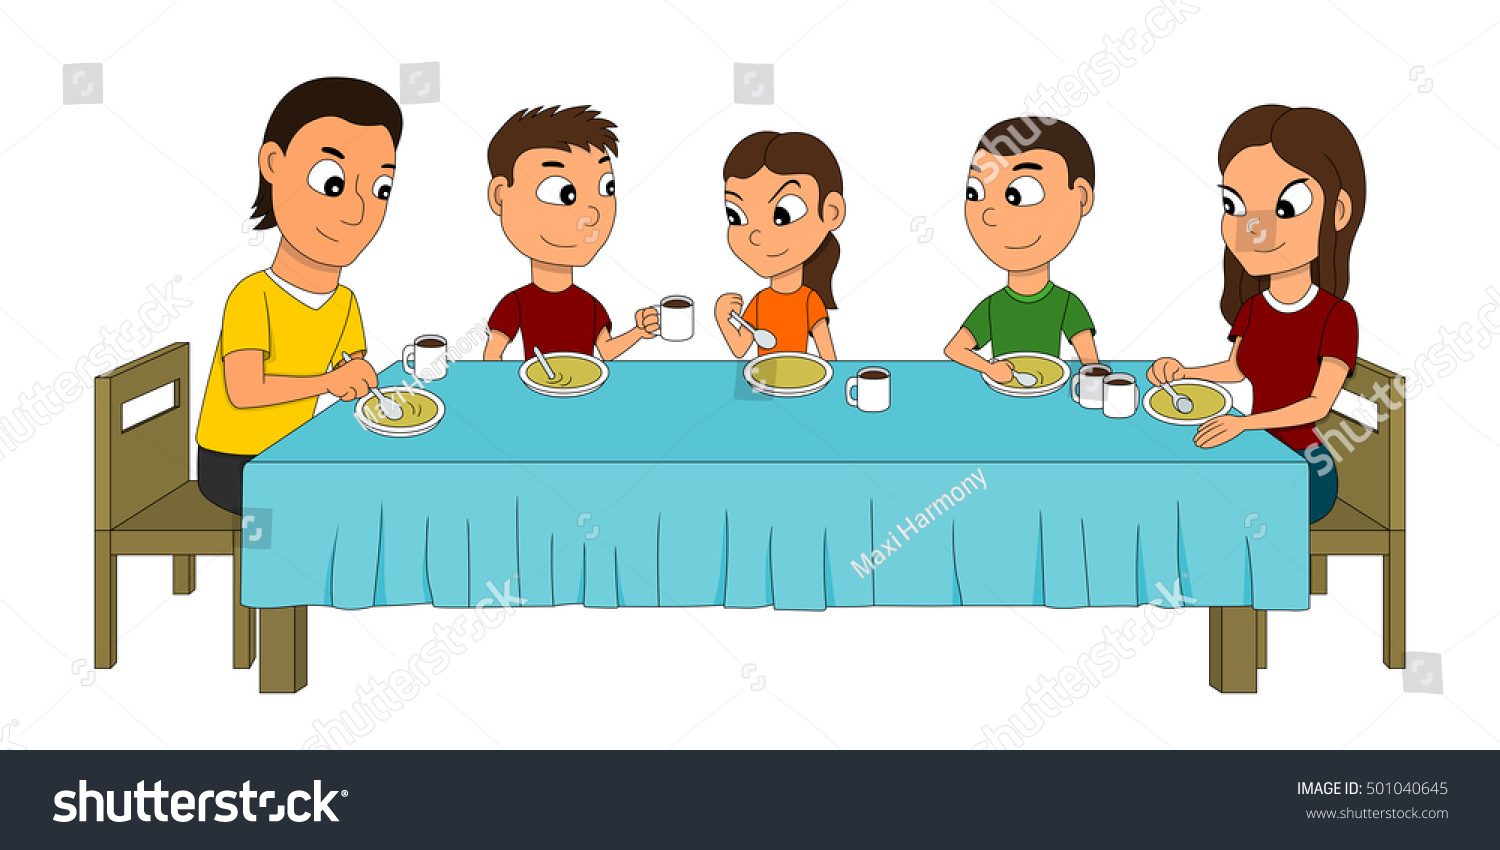 Illustration Of A Five Members Family Dinning At The Dinner Table ...